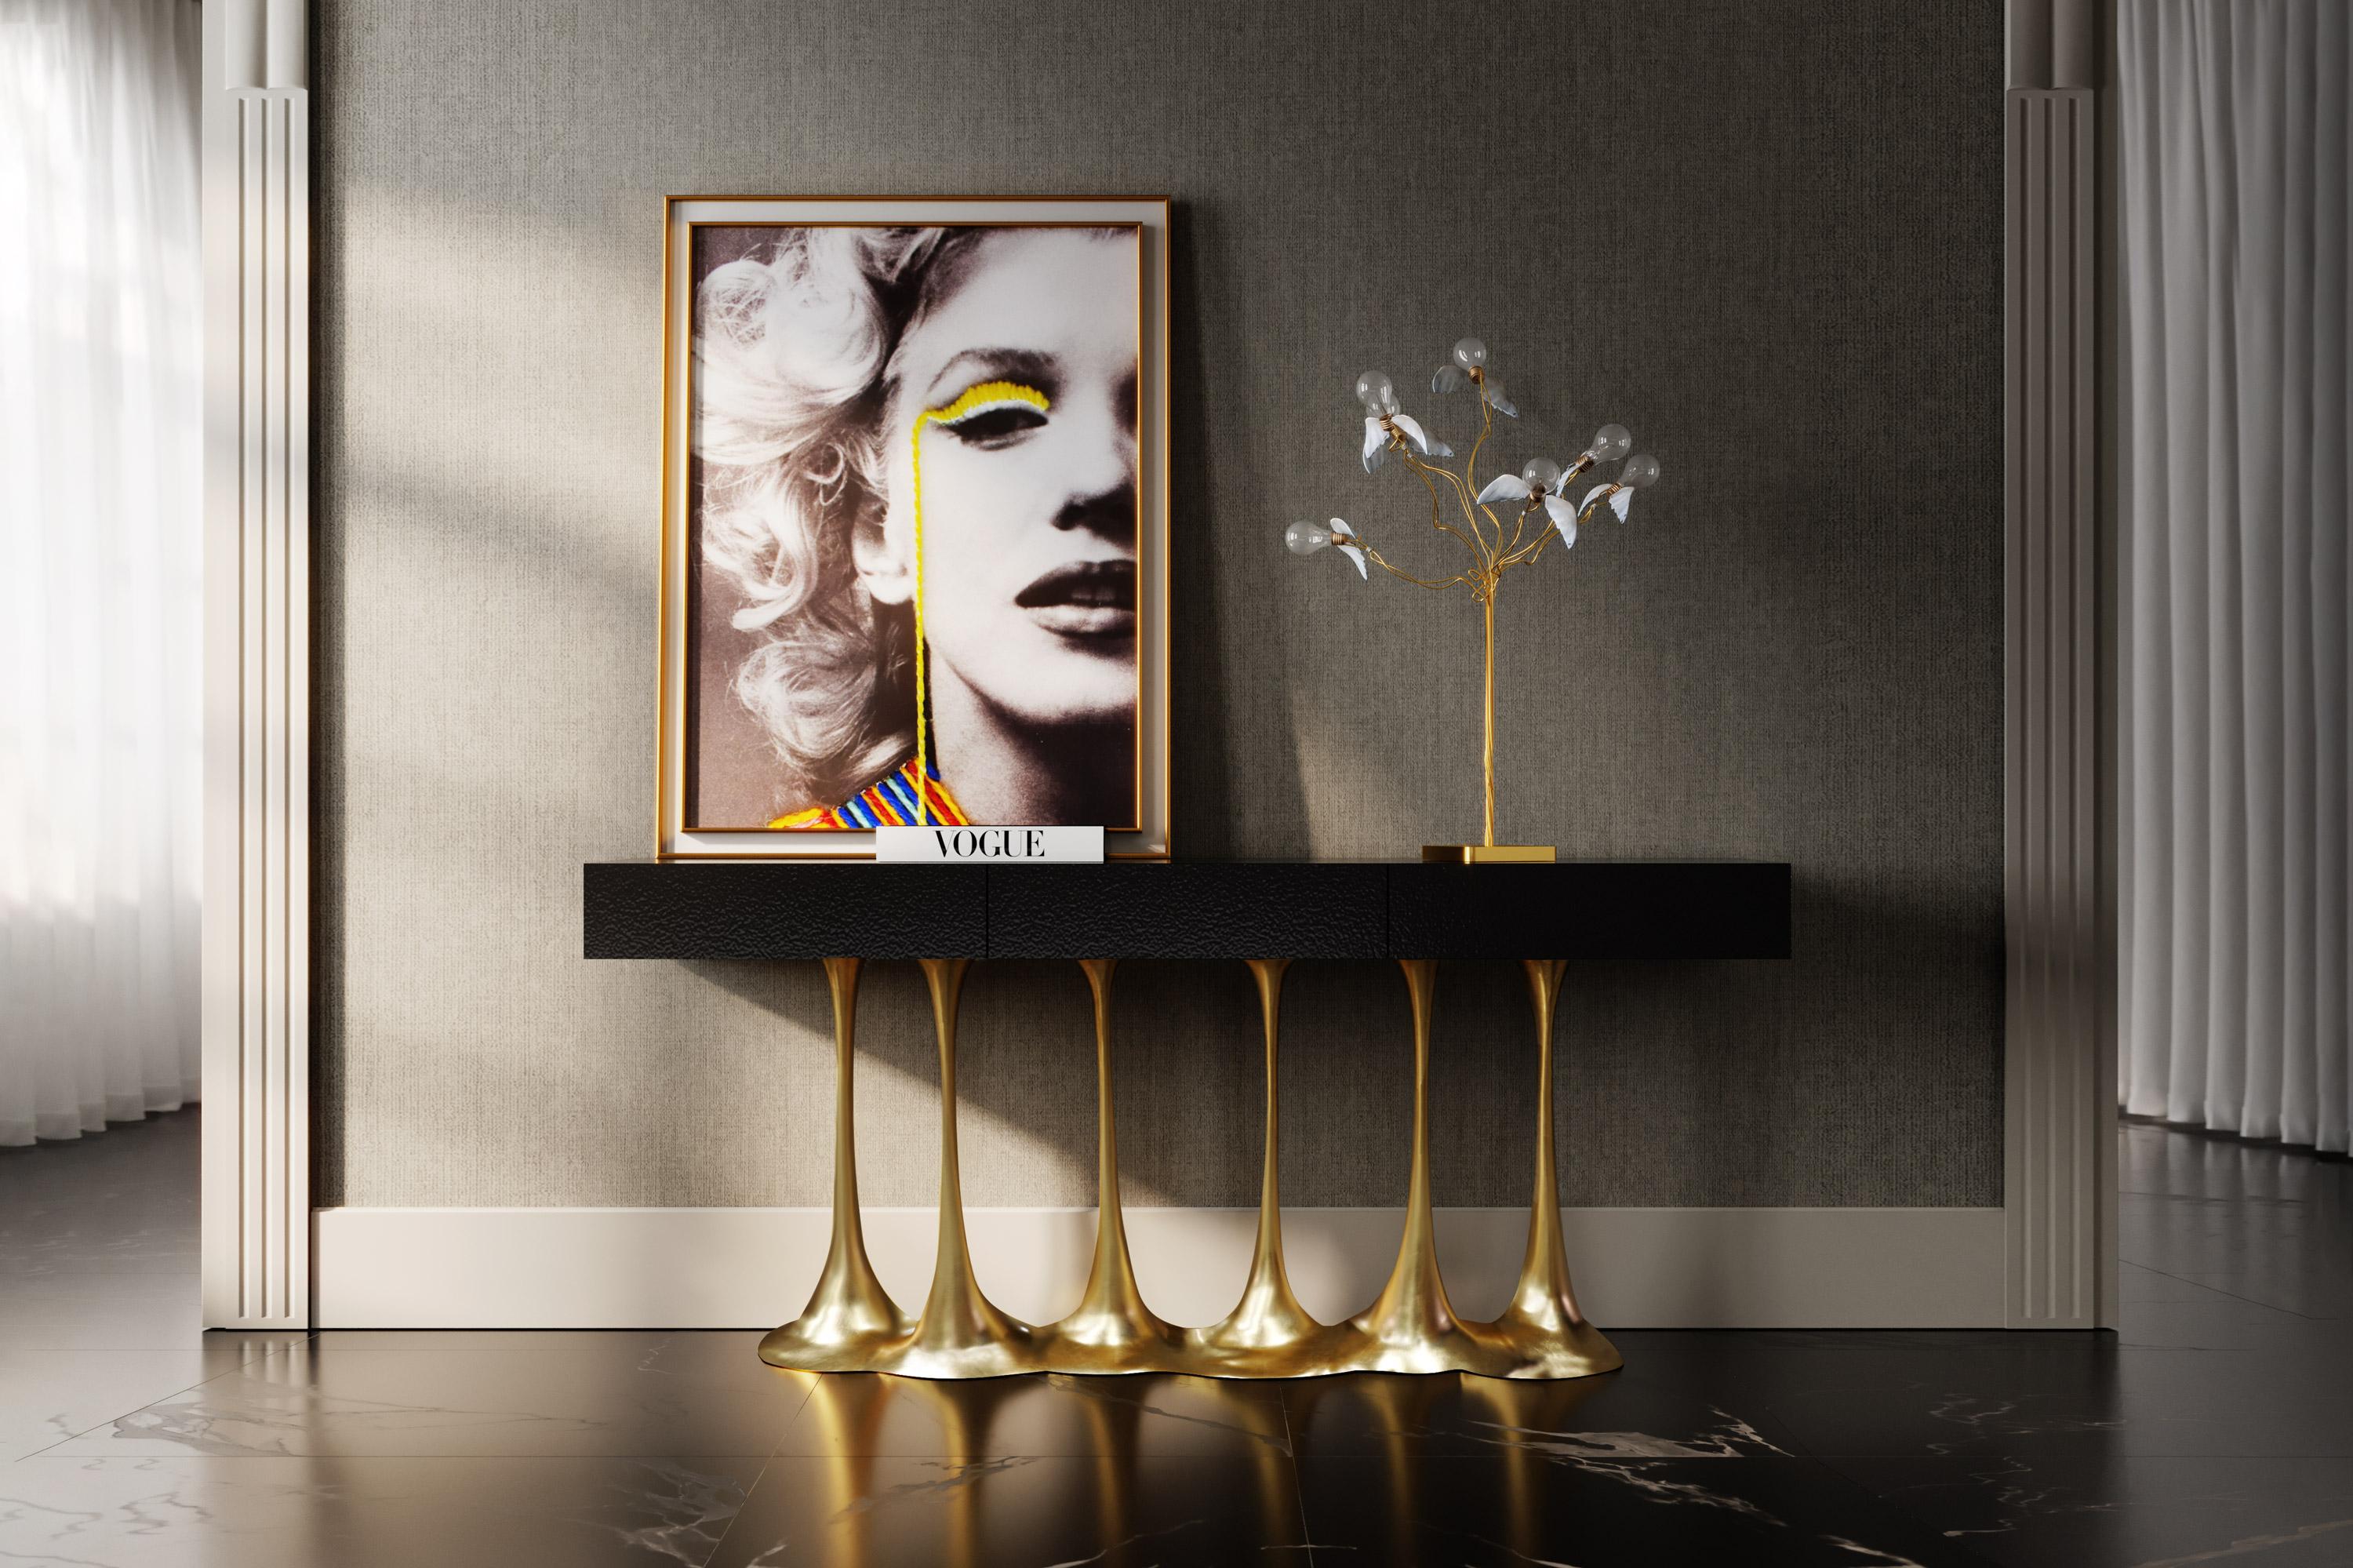 Janus is a luxurious and sculptural console that combines bold textures with amazing finishes. Its base is made of resin reinforced with fiberglass finished in Gold Leaf and its wooden console top is also reinforced with resin and fiberglass to have